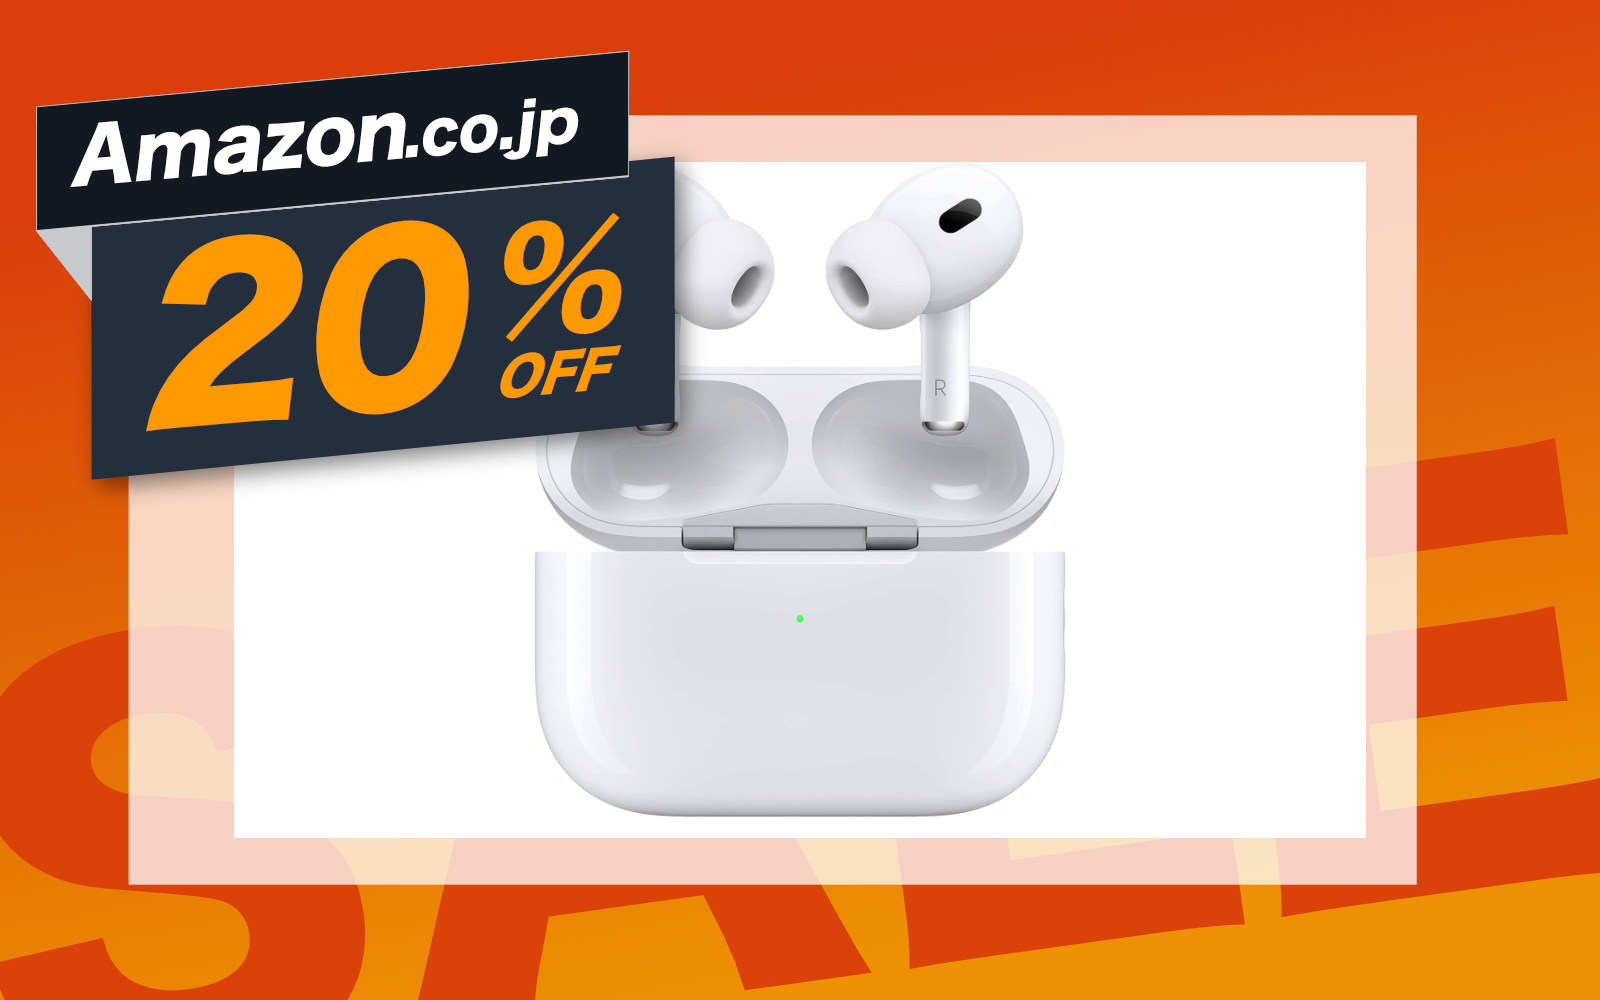 Airpods Pro 2ng gen usbc on sale at lowest